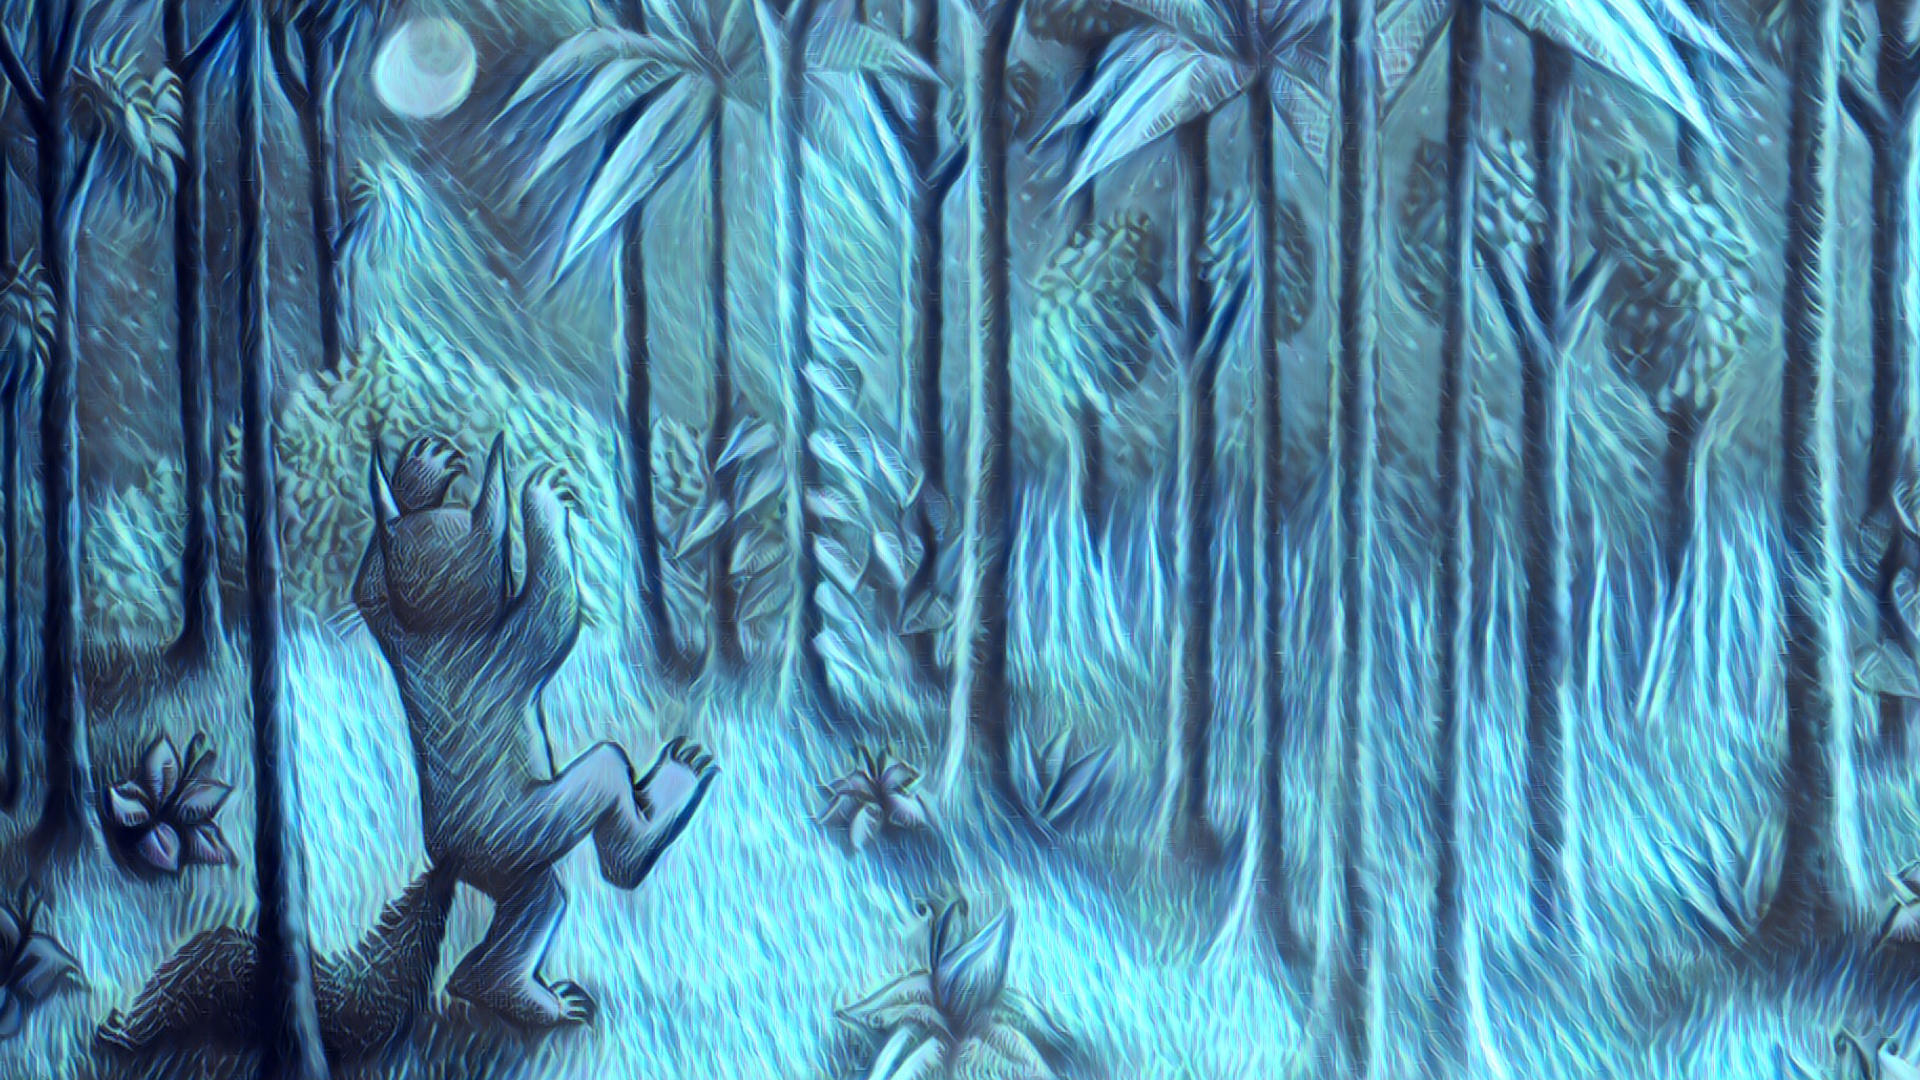 Where The Wild Things Are Night Forest Moon Maurice Sendak Cyan 1920x1080